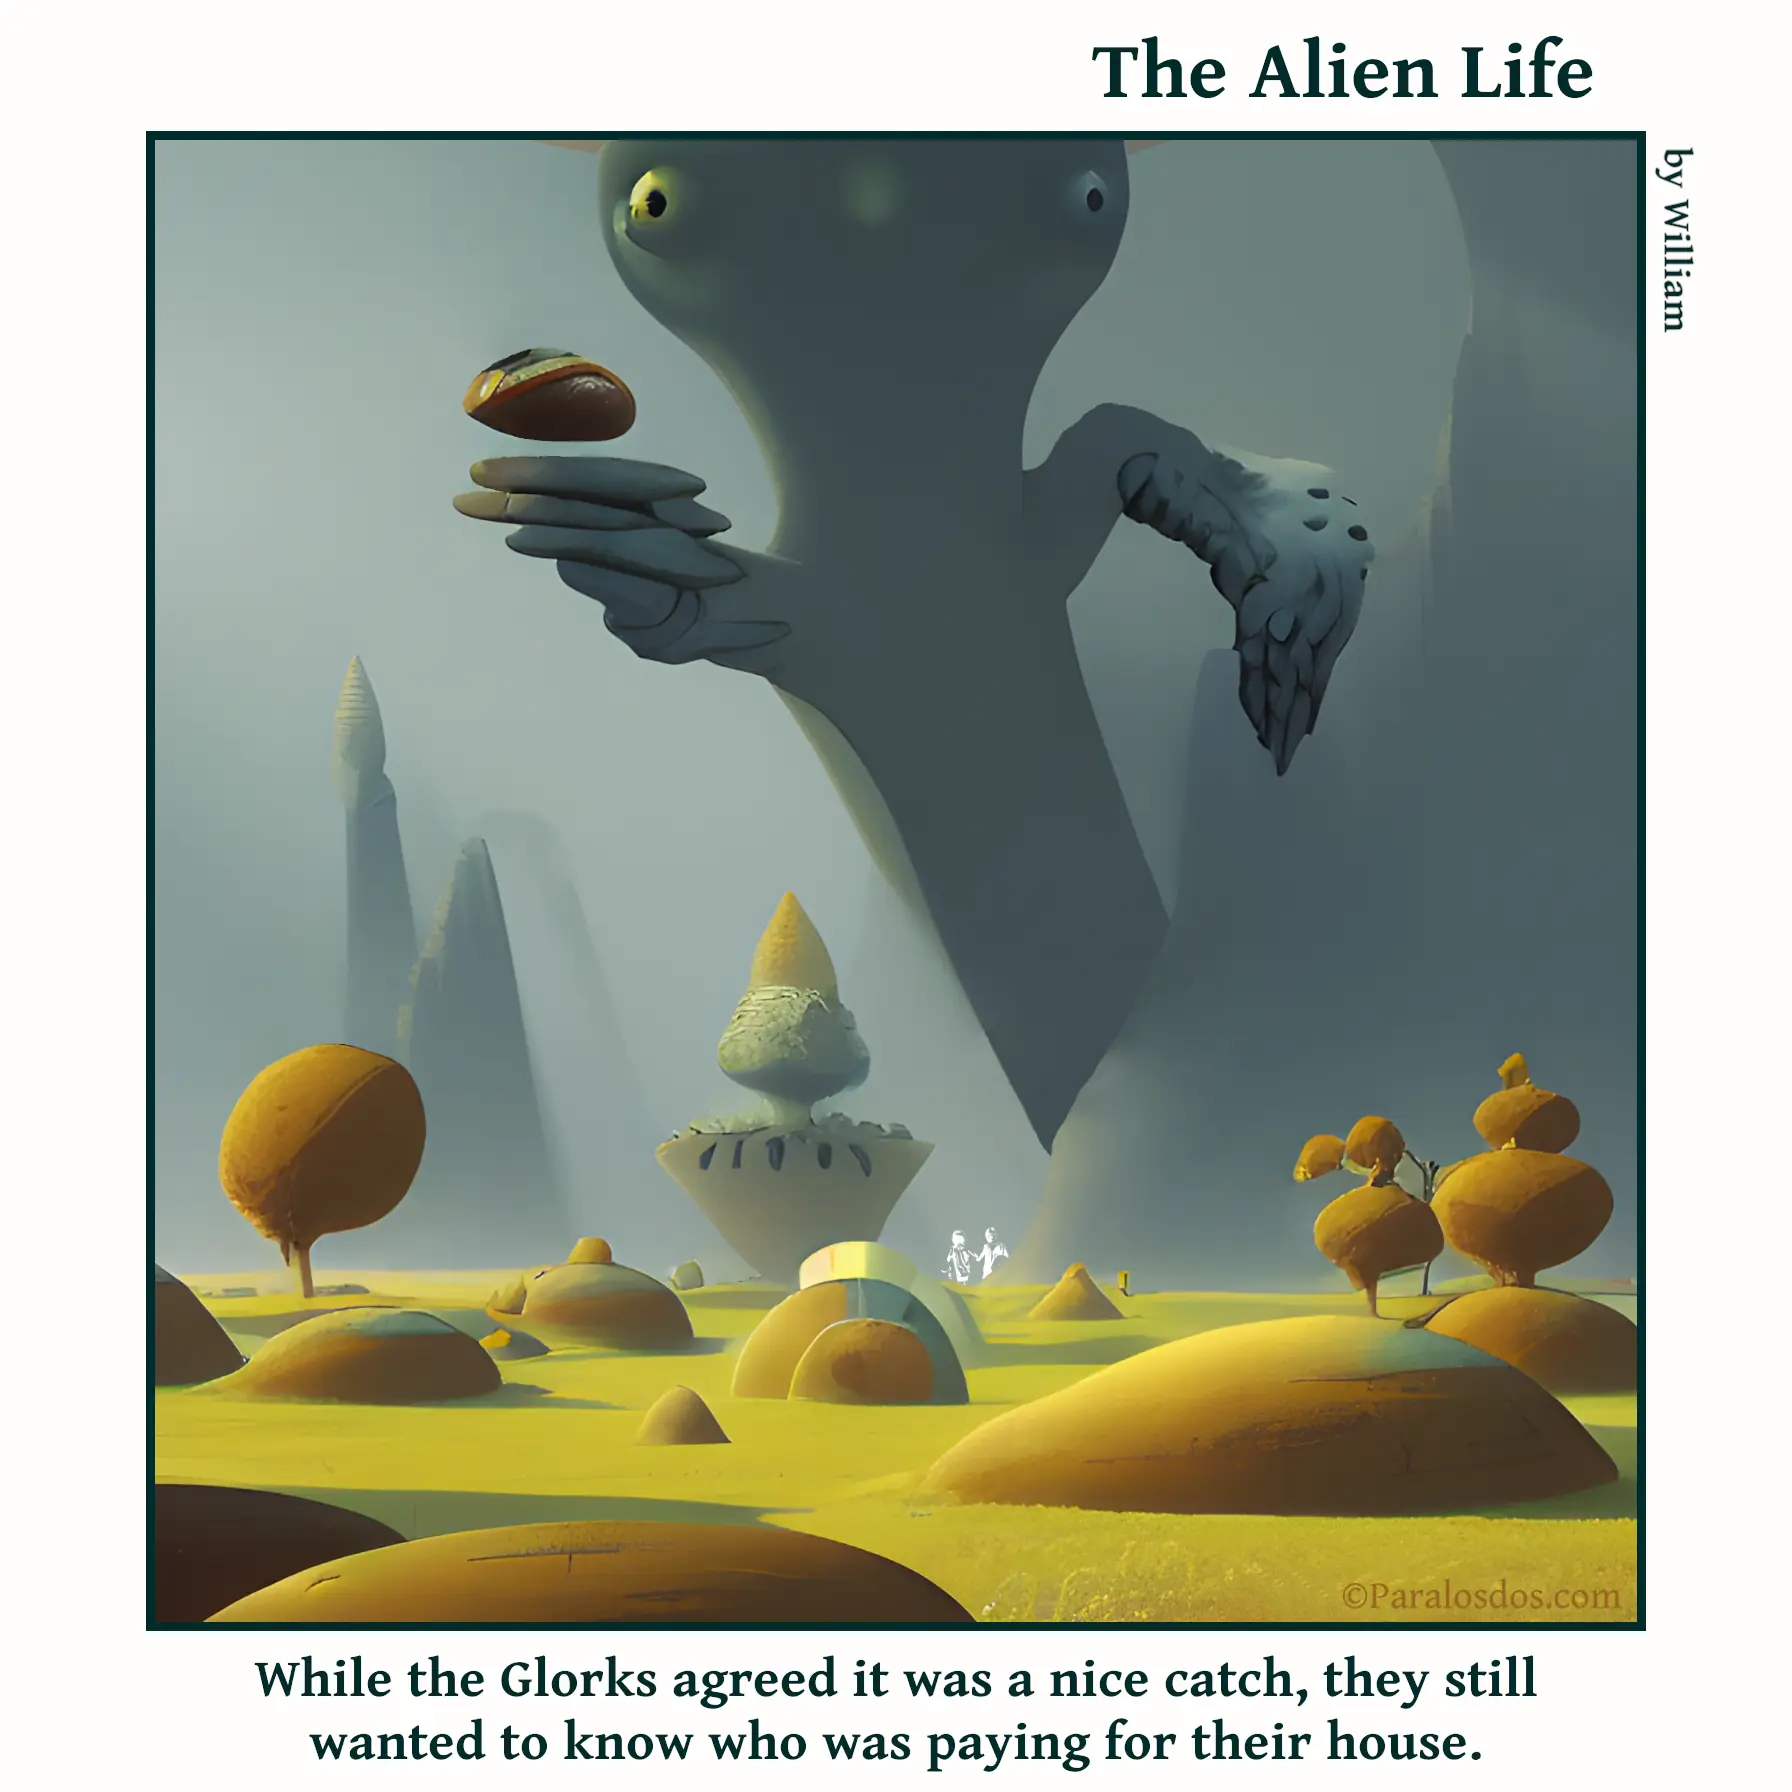 The Alien Life, one panel Comic. A giant alien is stretched out in a dive about to catch what looks like a big rock. He is going to land on a home. The caption reads: "While the Glorks agreed it was a nice catch, they still wanted to know who was paying for their house."